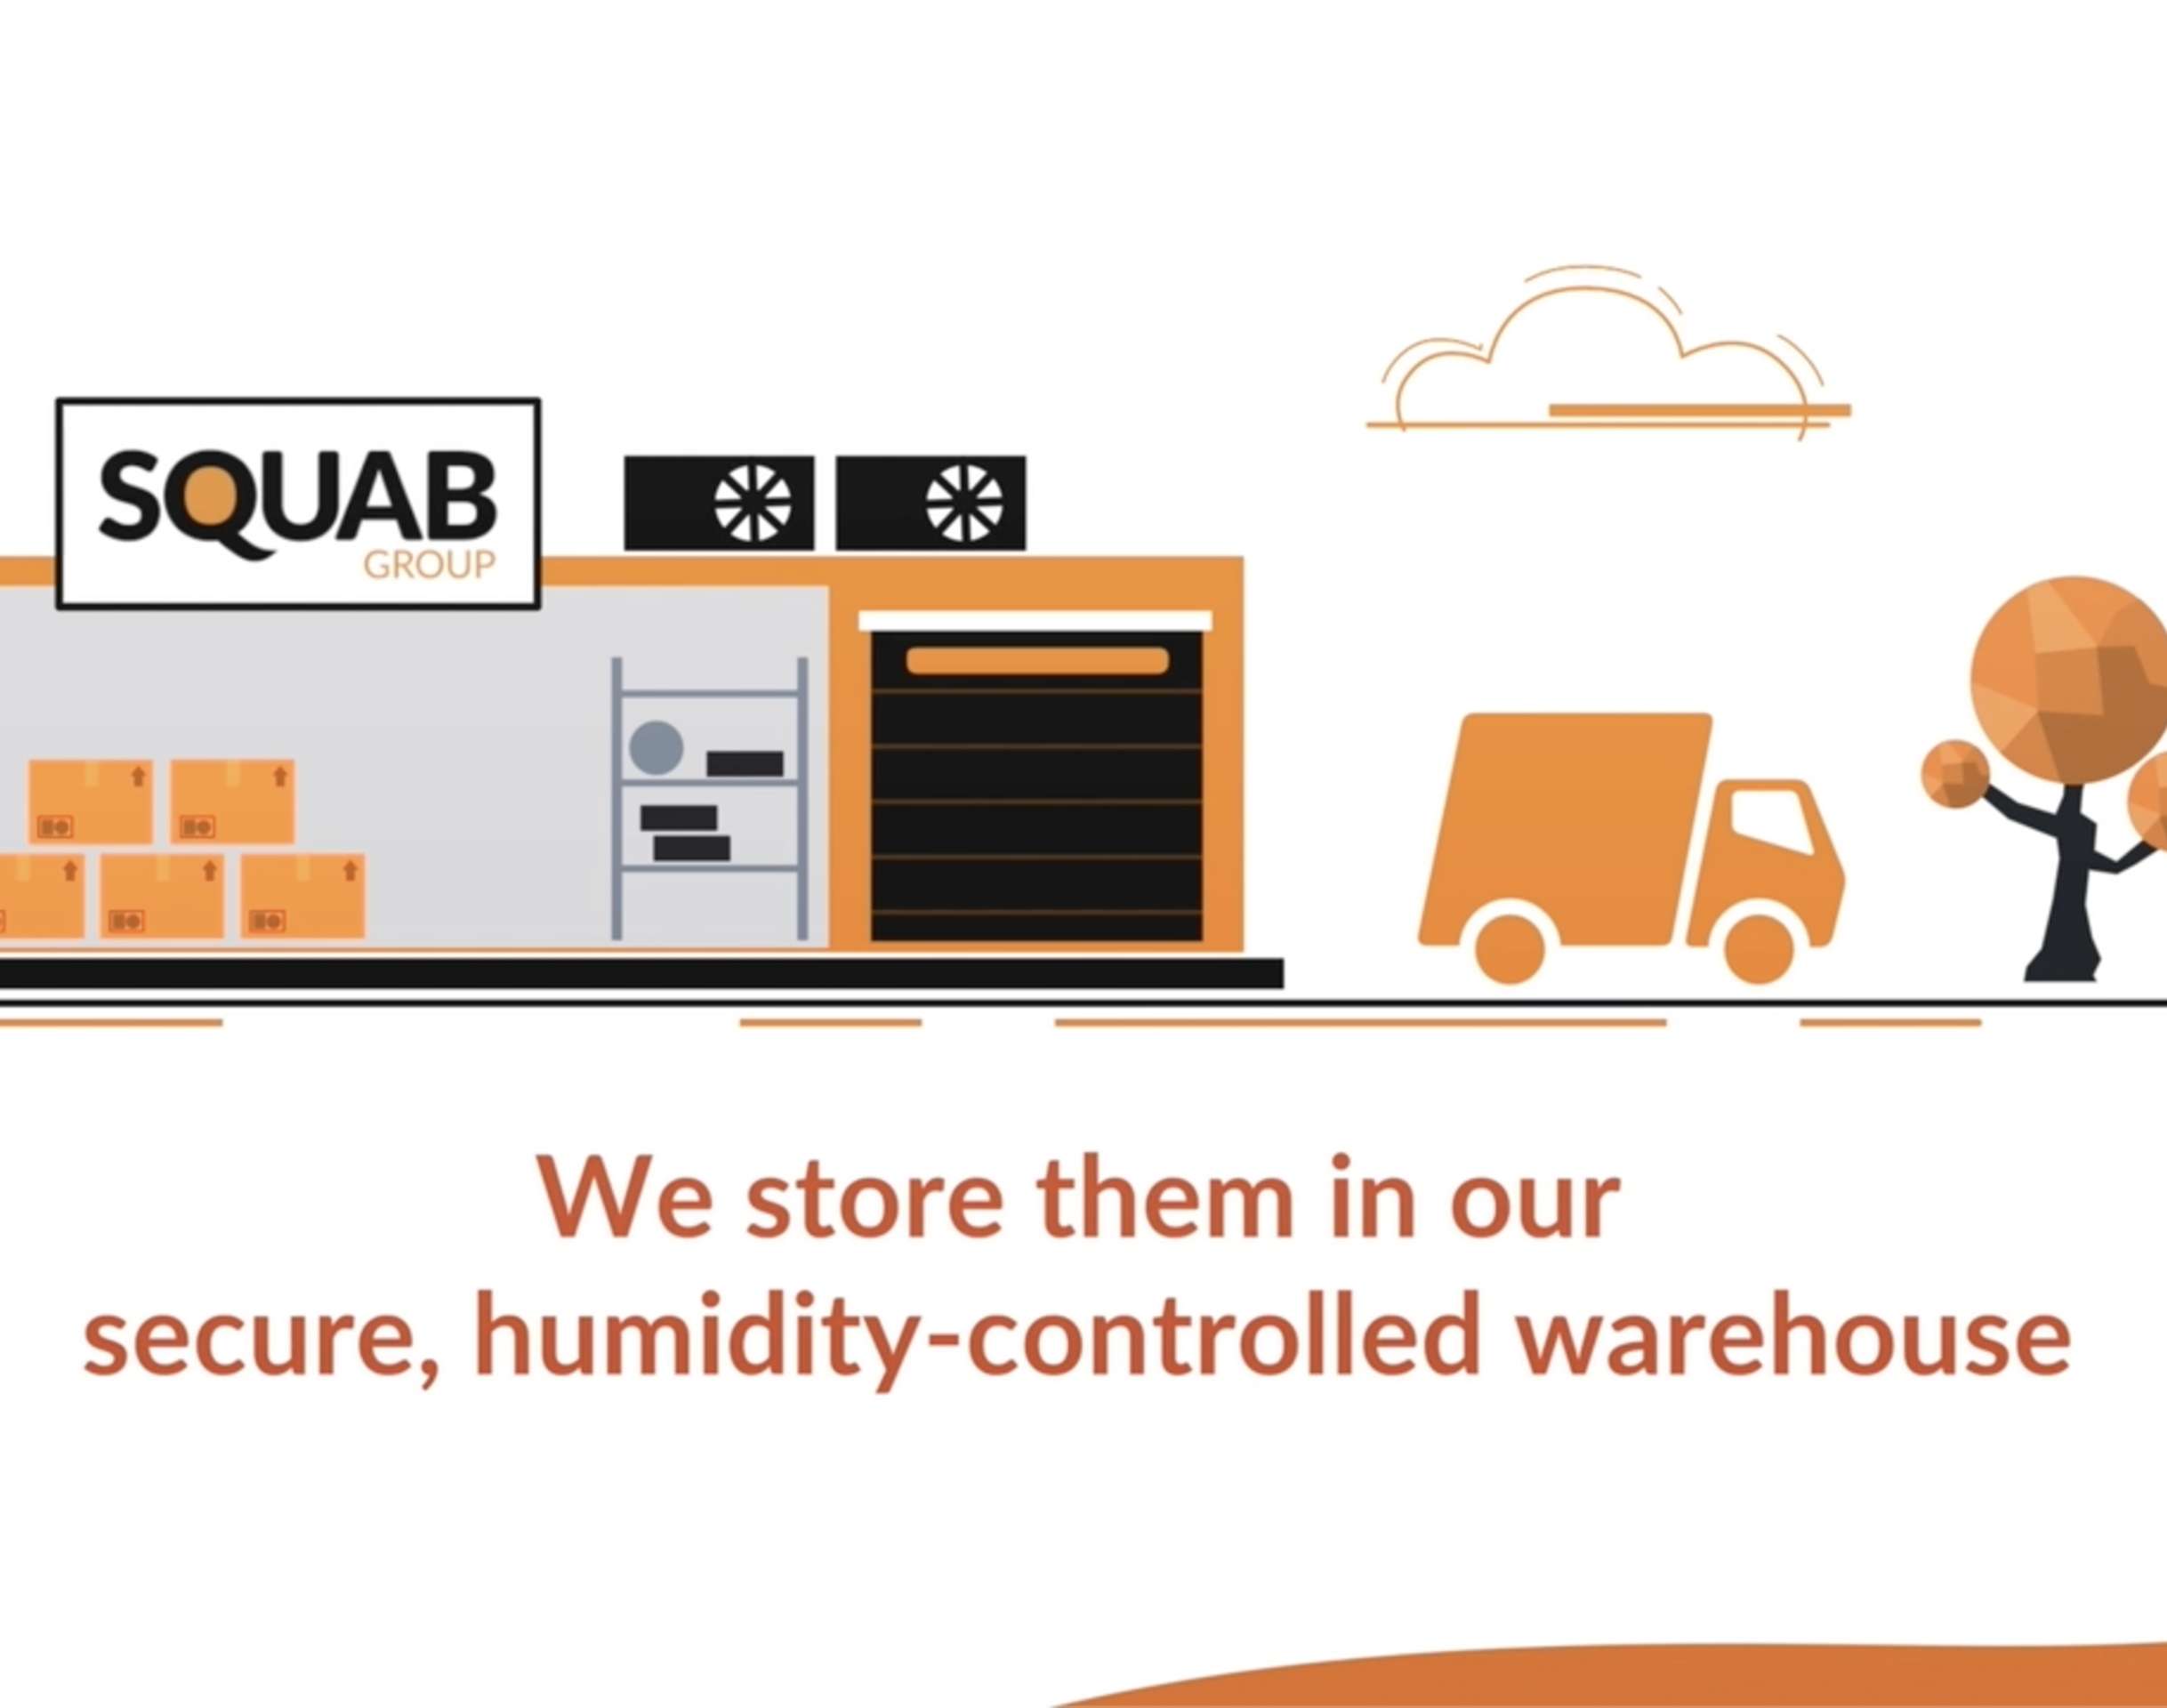 Squab Case Study Image - We store them in our secure, humidity-controlled warehouse